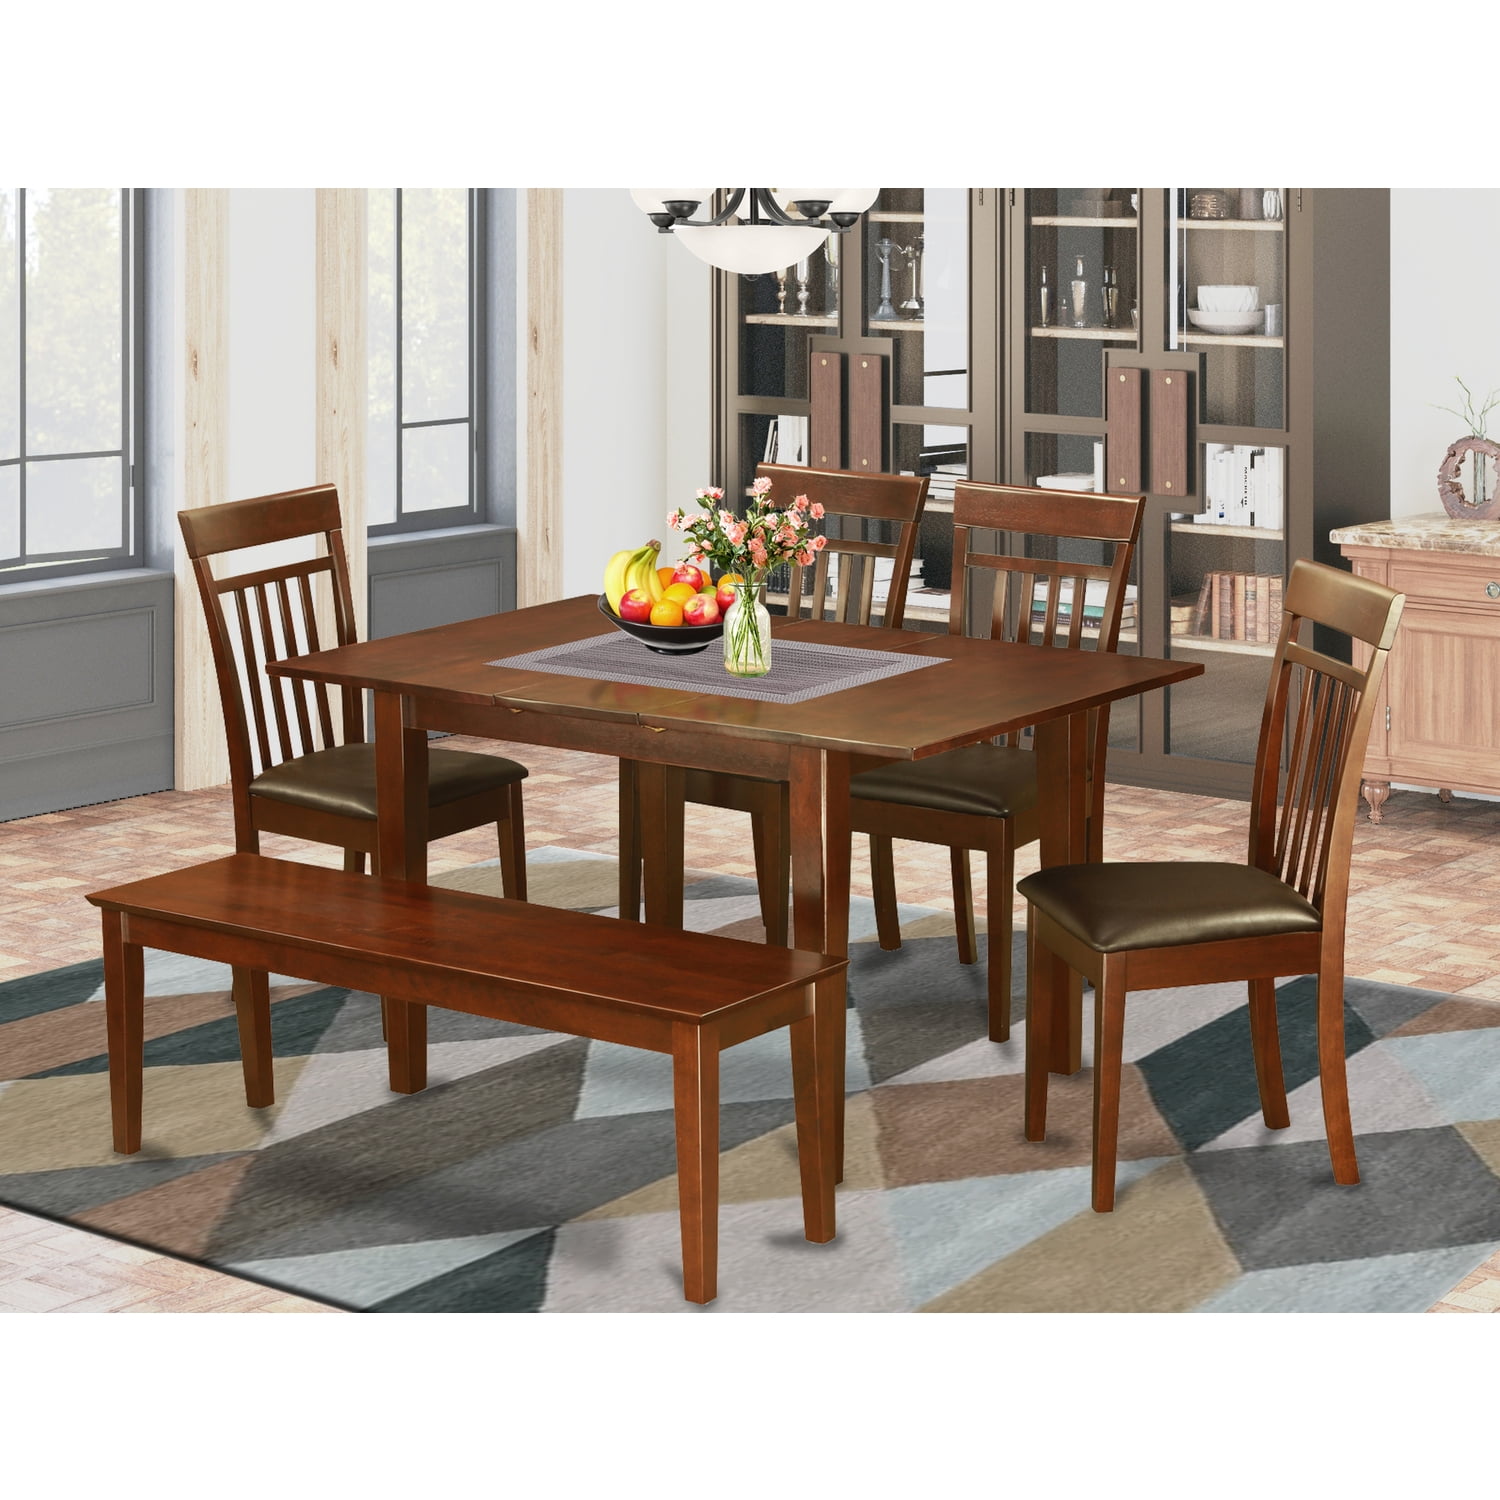 East west furniture 7 Pc dinette set for small spaces - dinette Table